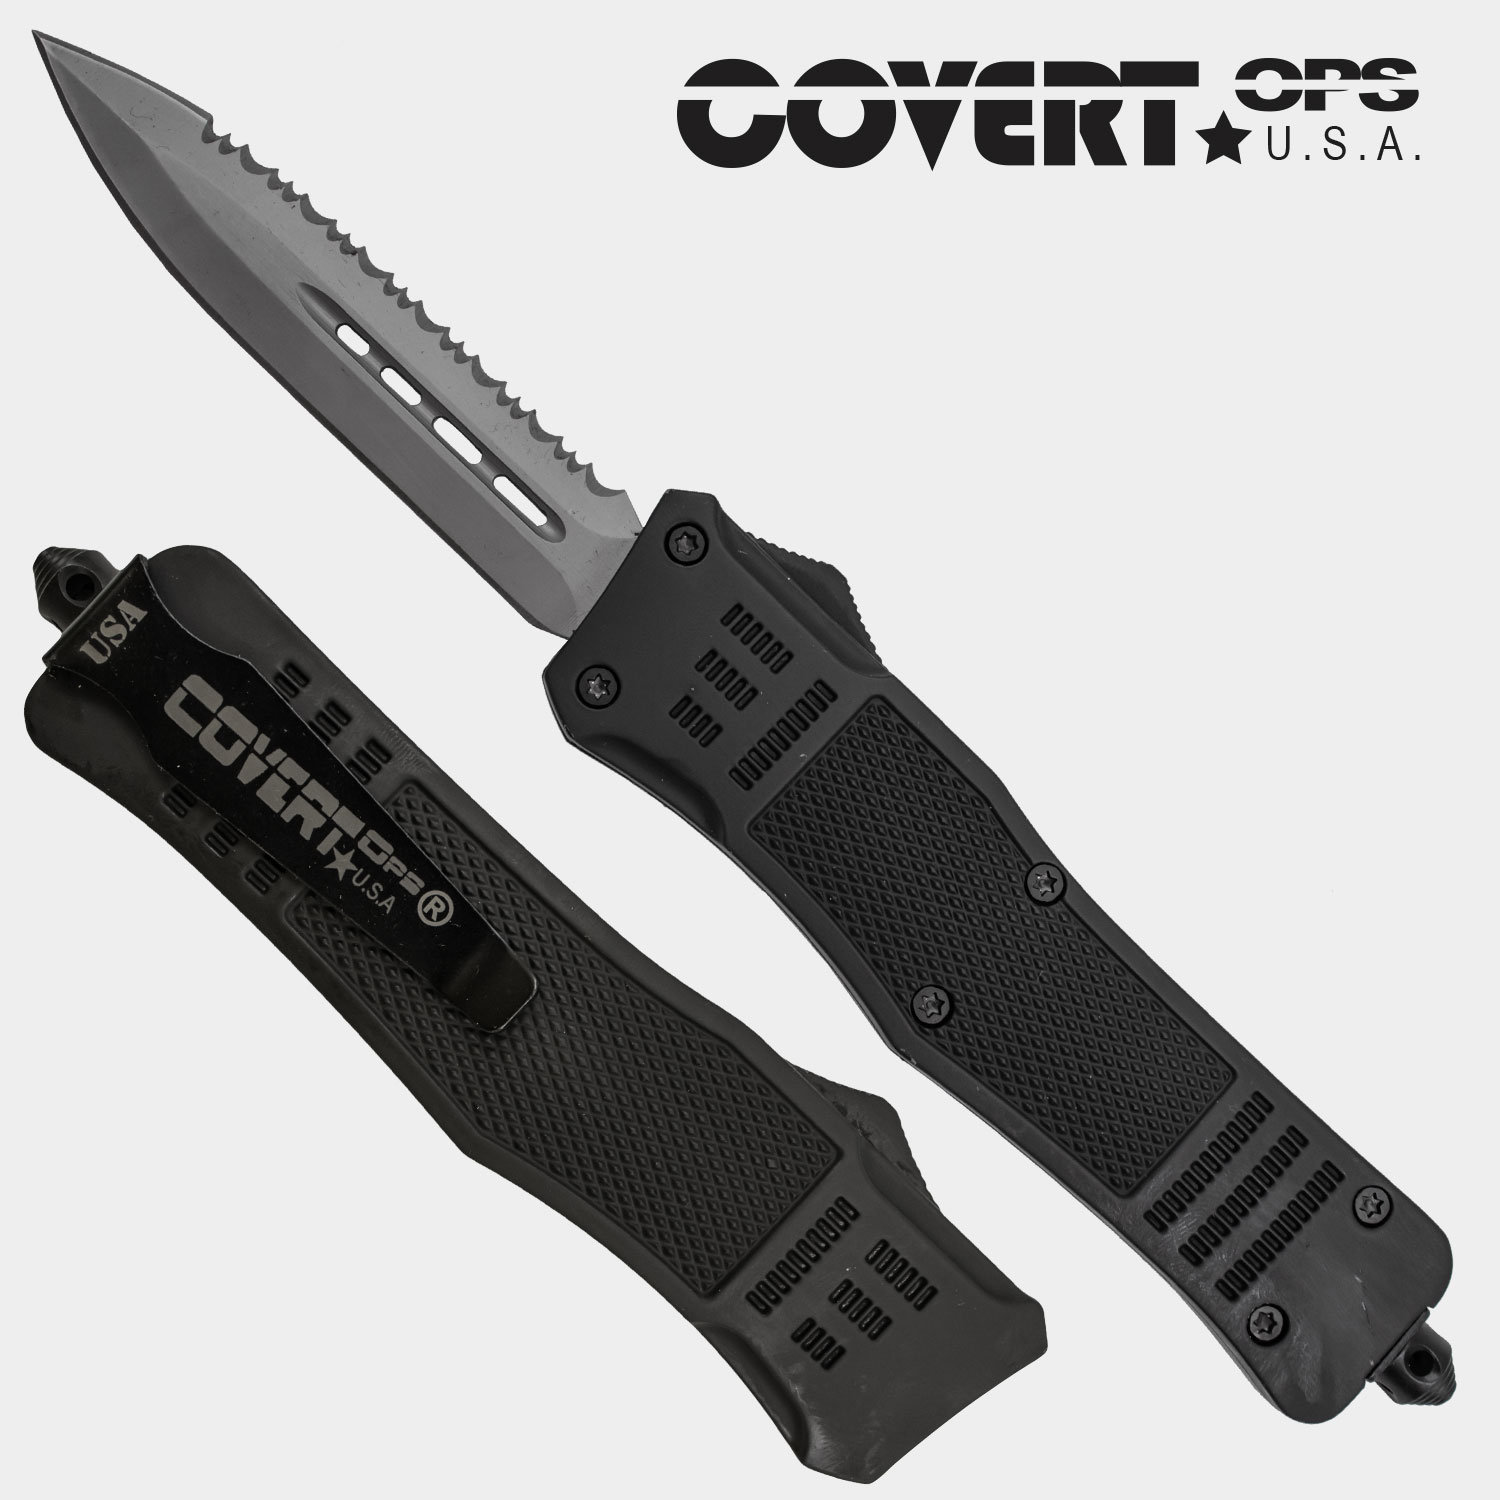 Covert OPS USA OTF Automatic Knife 9 inch Black Handle Silver Half Serrated Blade